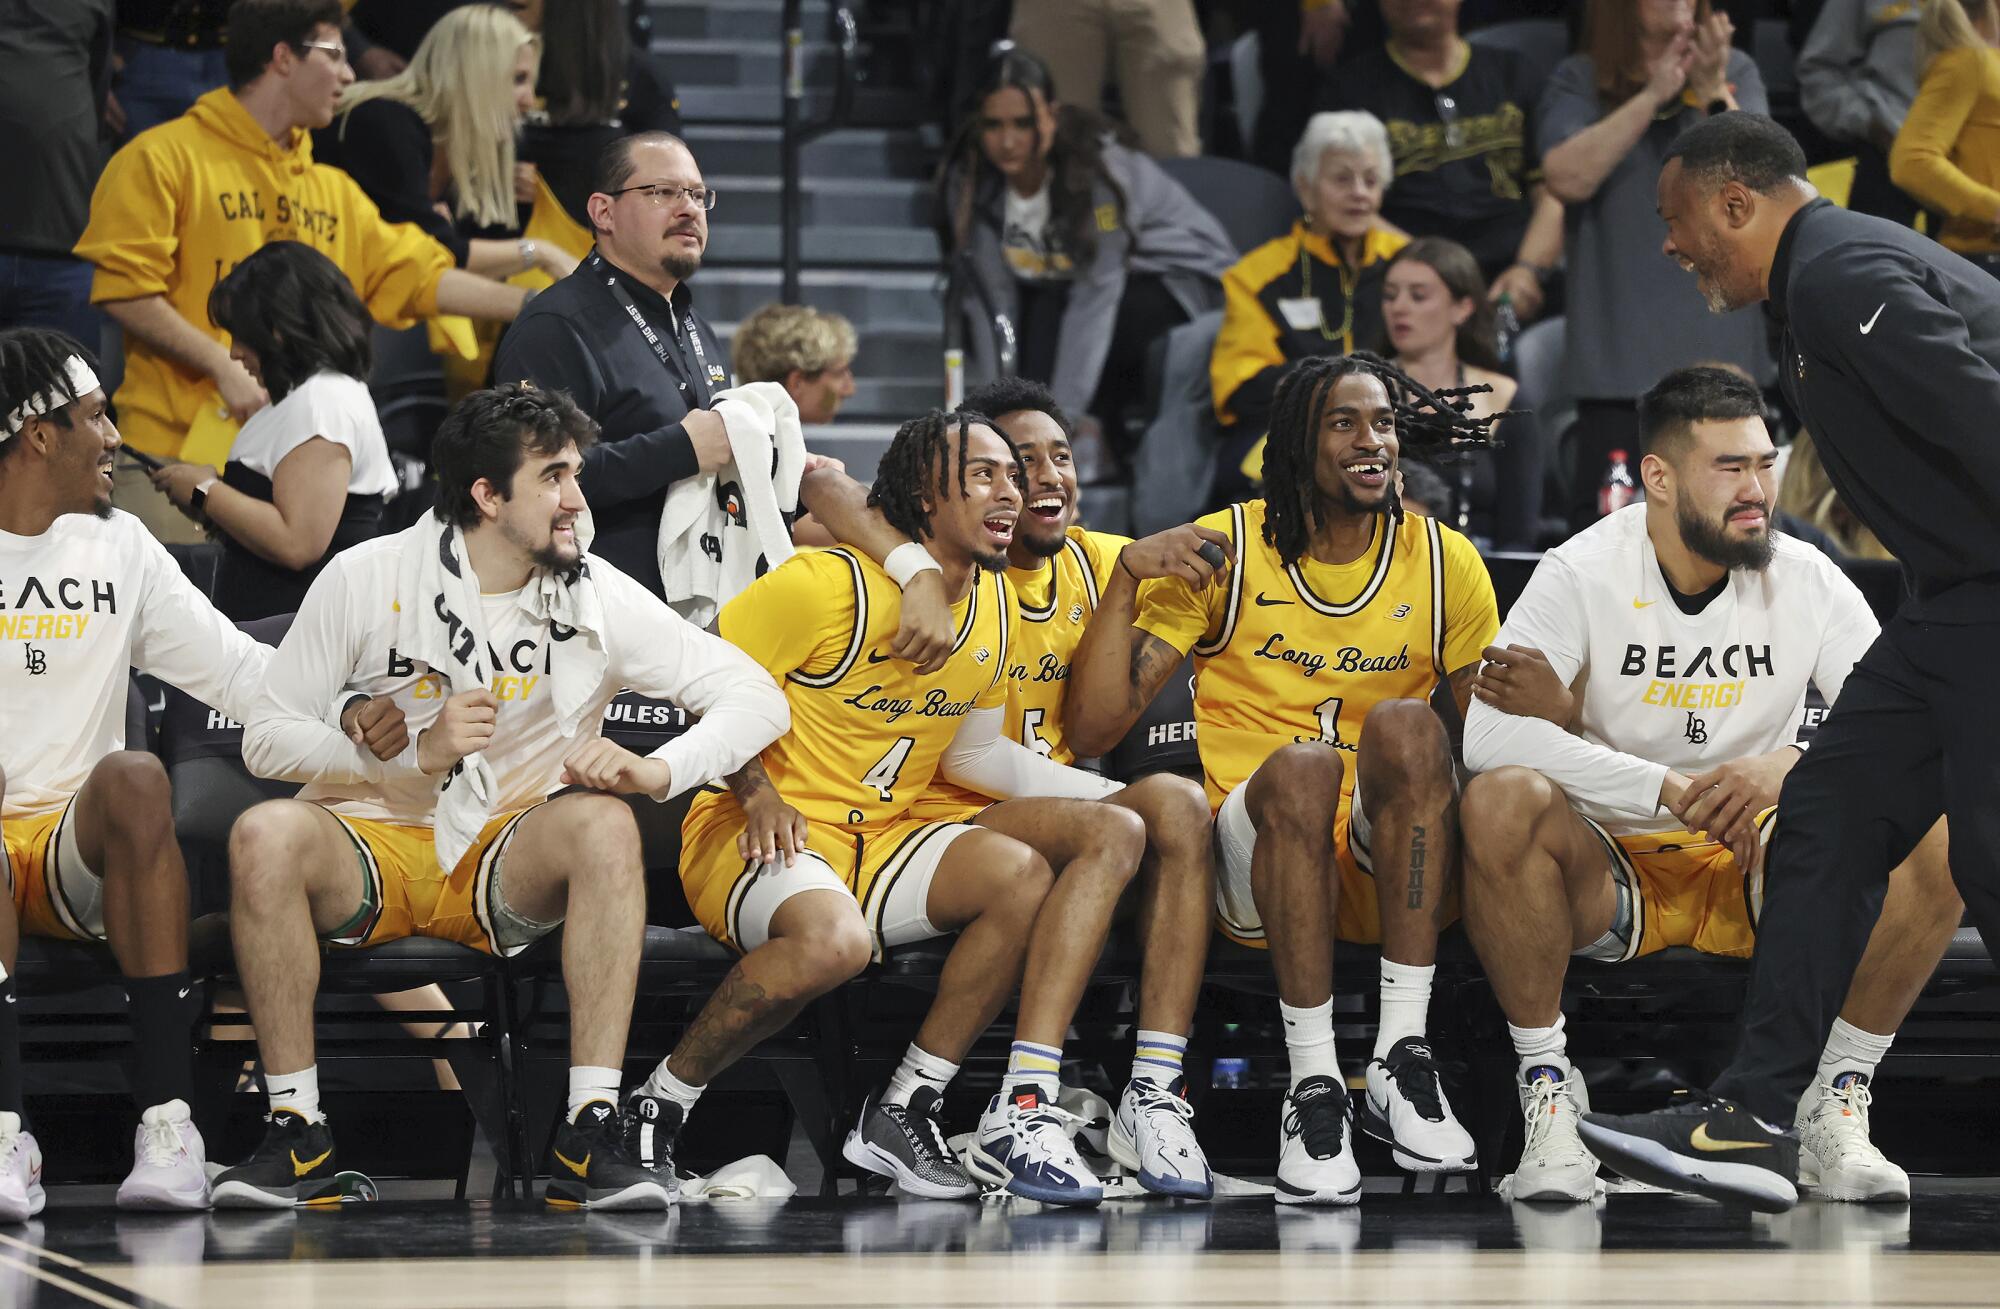 Long Beach State players cheer on the sidelines.